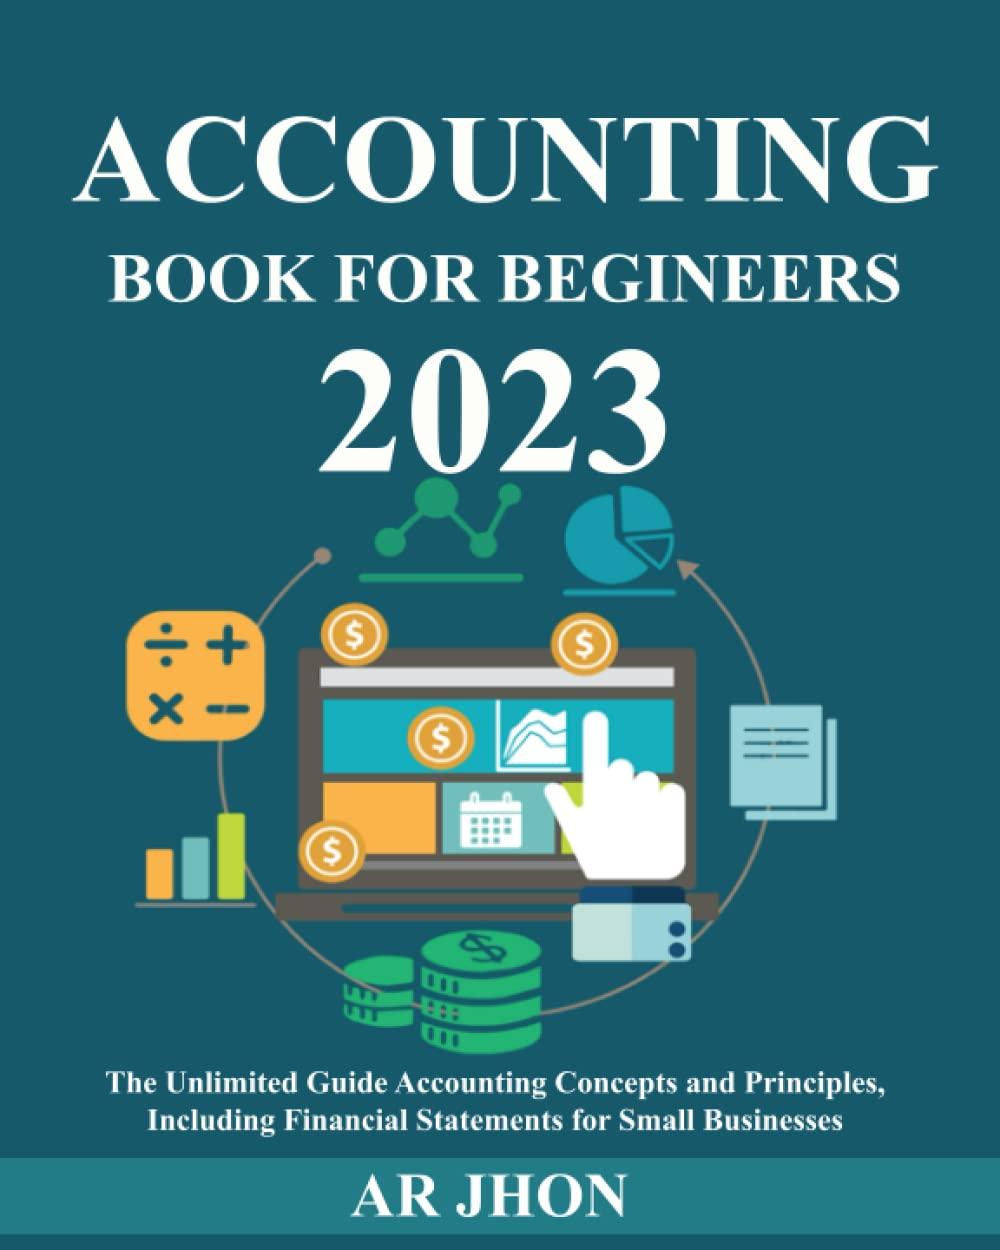 accounting book for beginners 2023 the unlimited guide accounting concepts and principles including financial